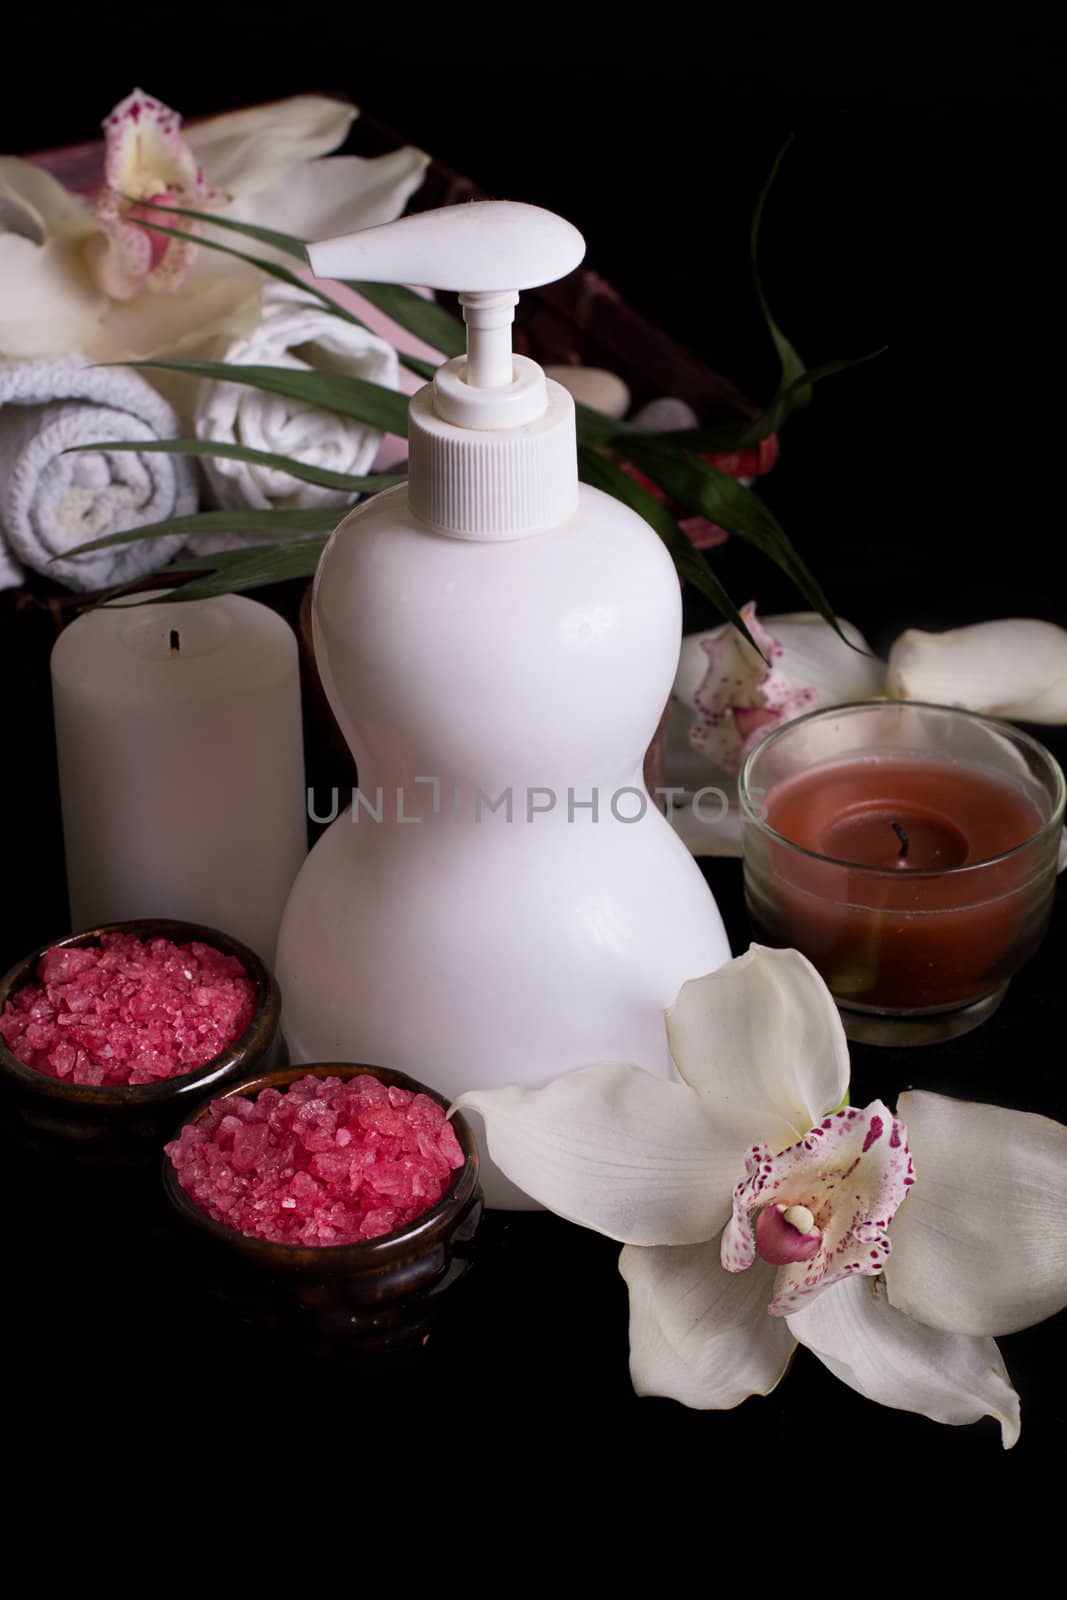 White orchids and spa treatment products isolated on black